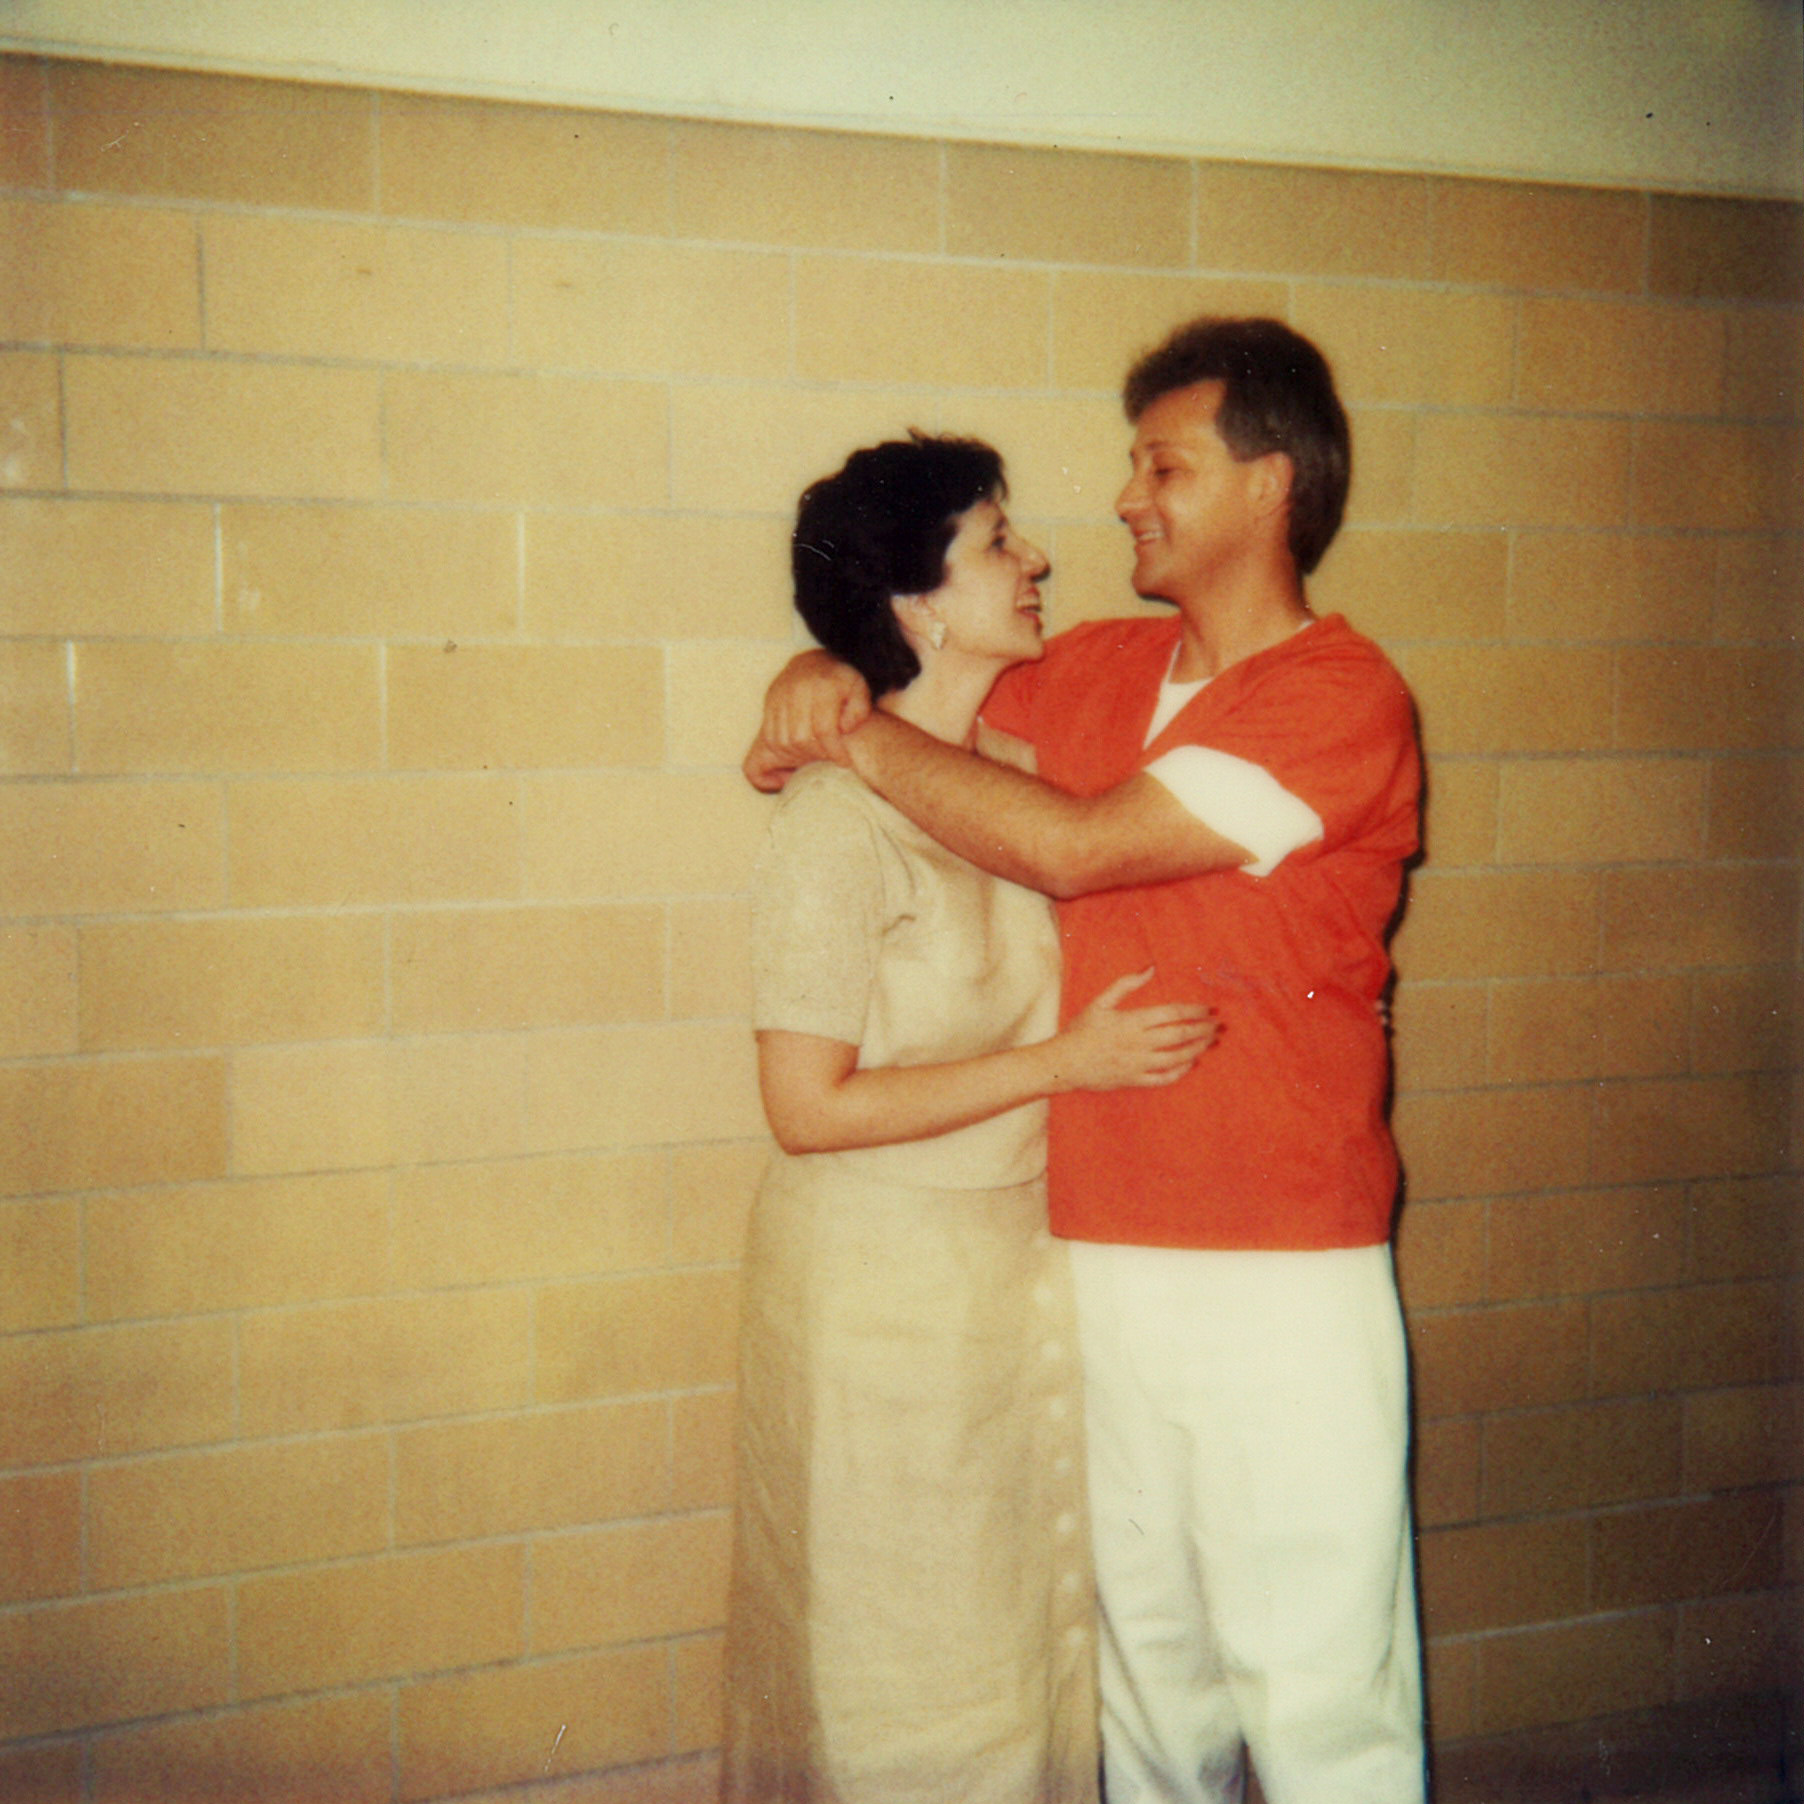 PHOTO: Rosalie and Oscar Bolin are pictured here in an undated photo together at Florida State Prison, where Oscar Bolin is on death row.